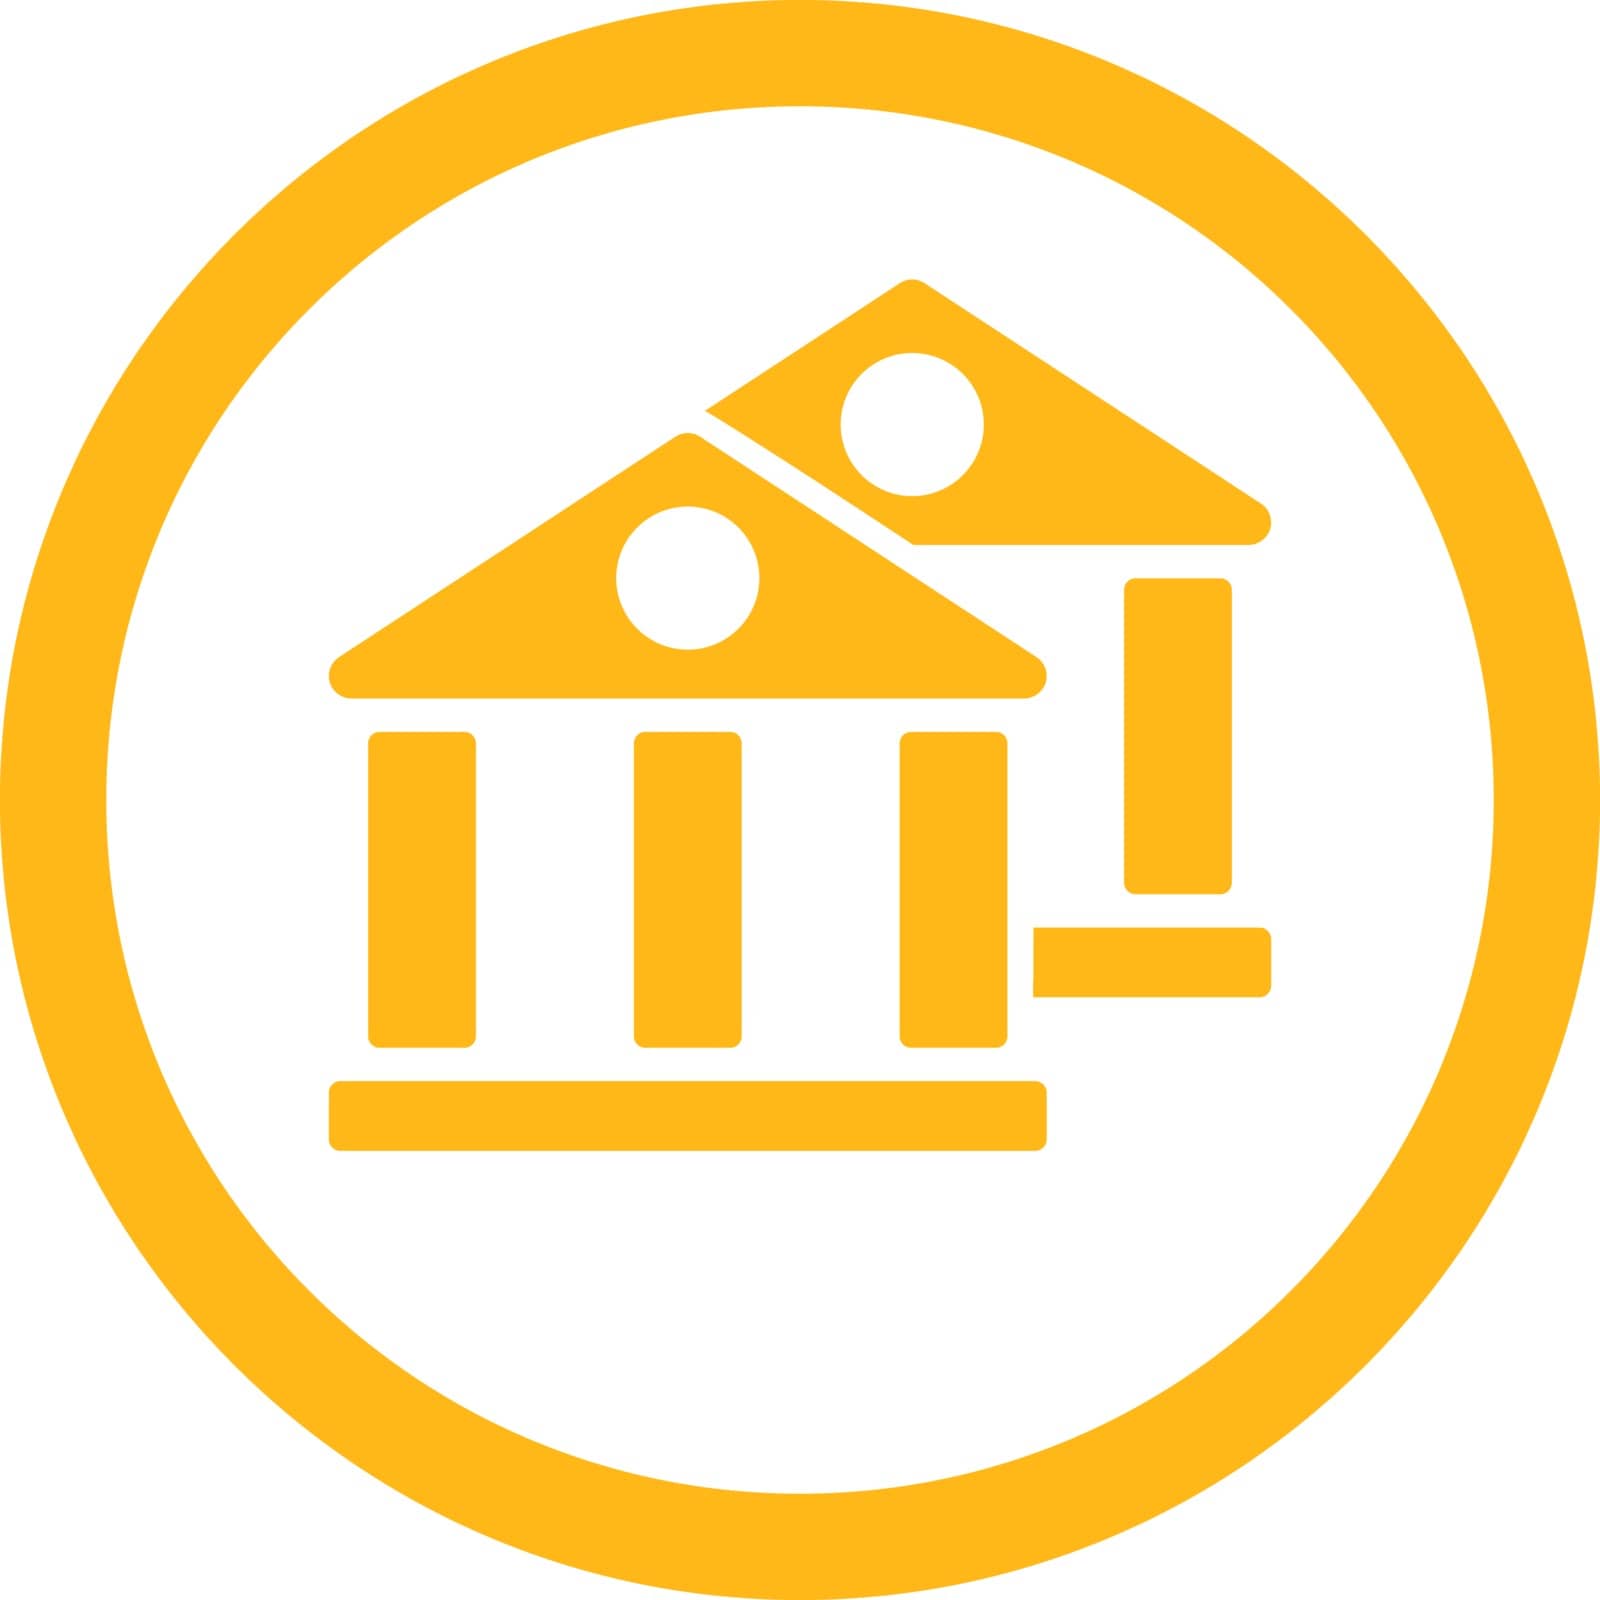 Banks vector icon. This flat rounded symbol uses yellow color and isolated on a white background.